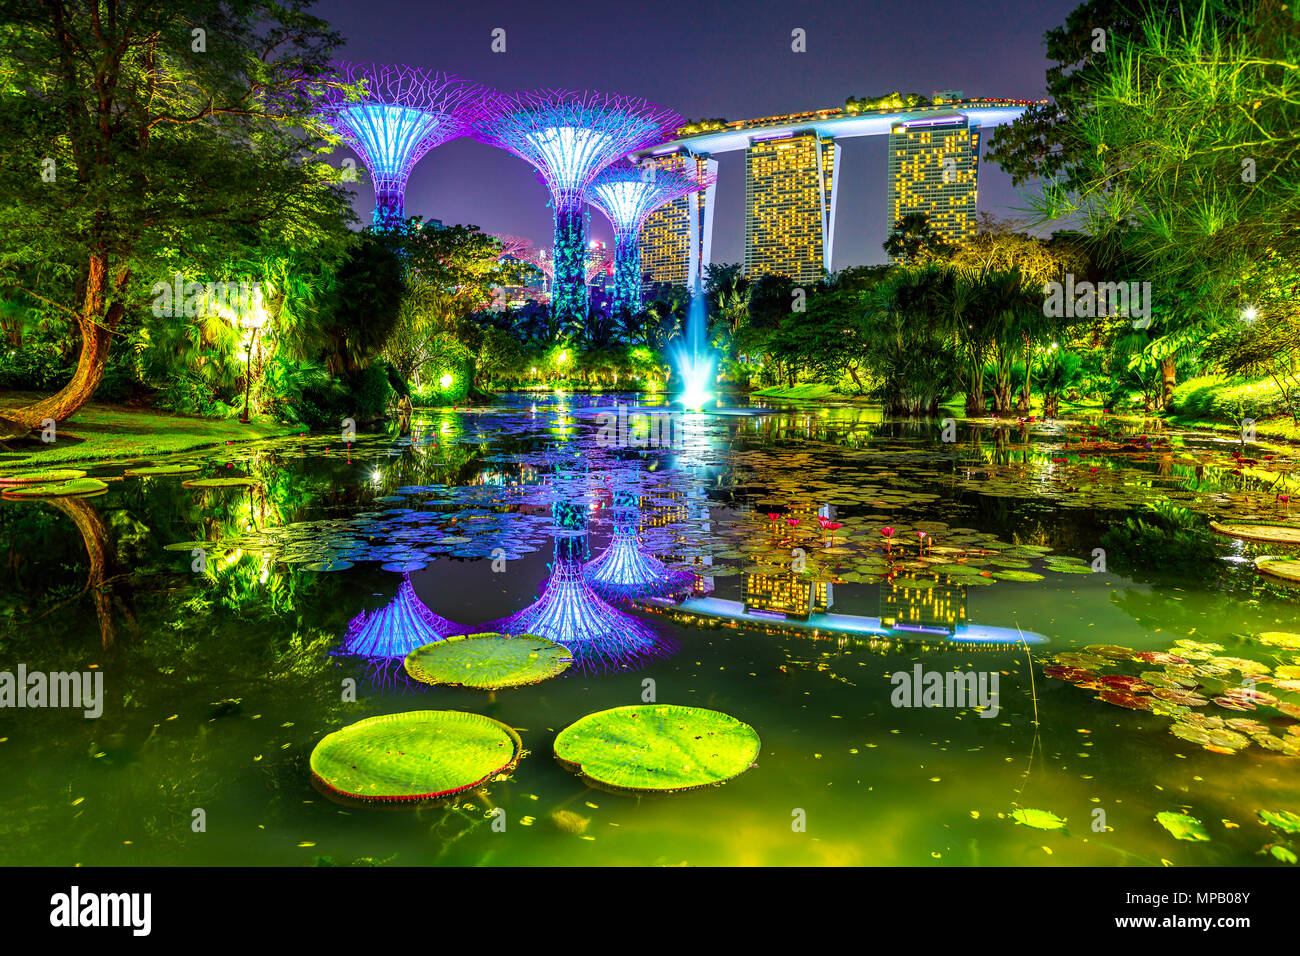 Spectacular skyline of Gardens by the Bay with blue and violet lighting and modern skyscraper reflecting in Water Lily Pond by night. Marina bay area in Central Singapore, Southeast Asia. Stock Photo